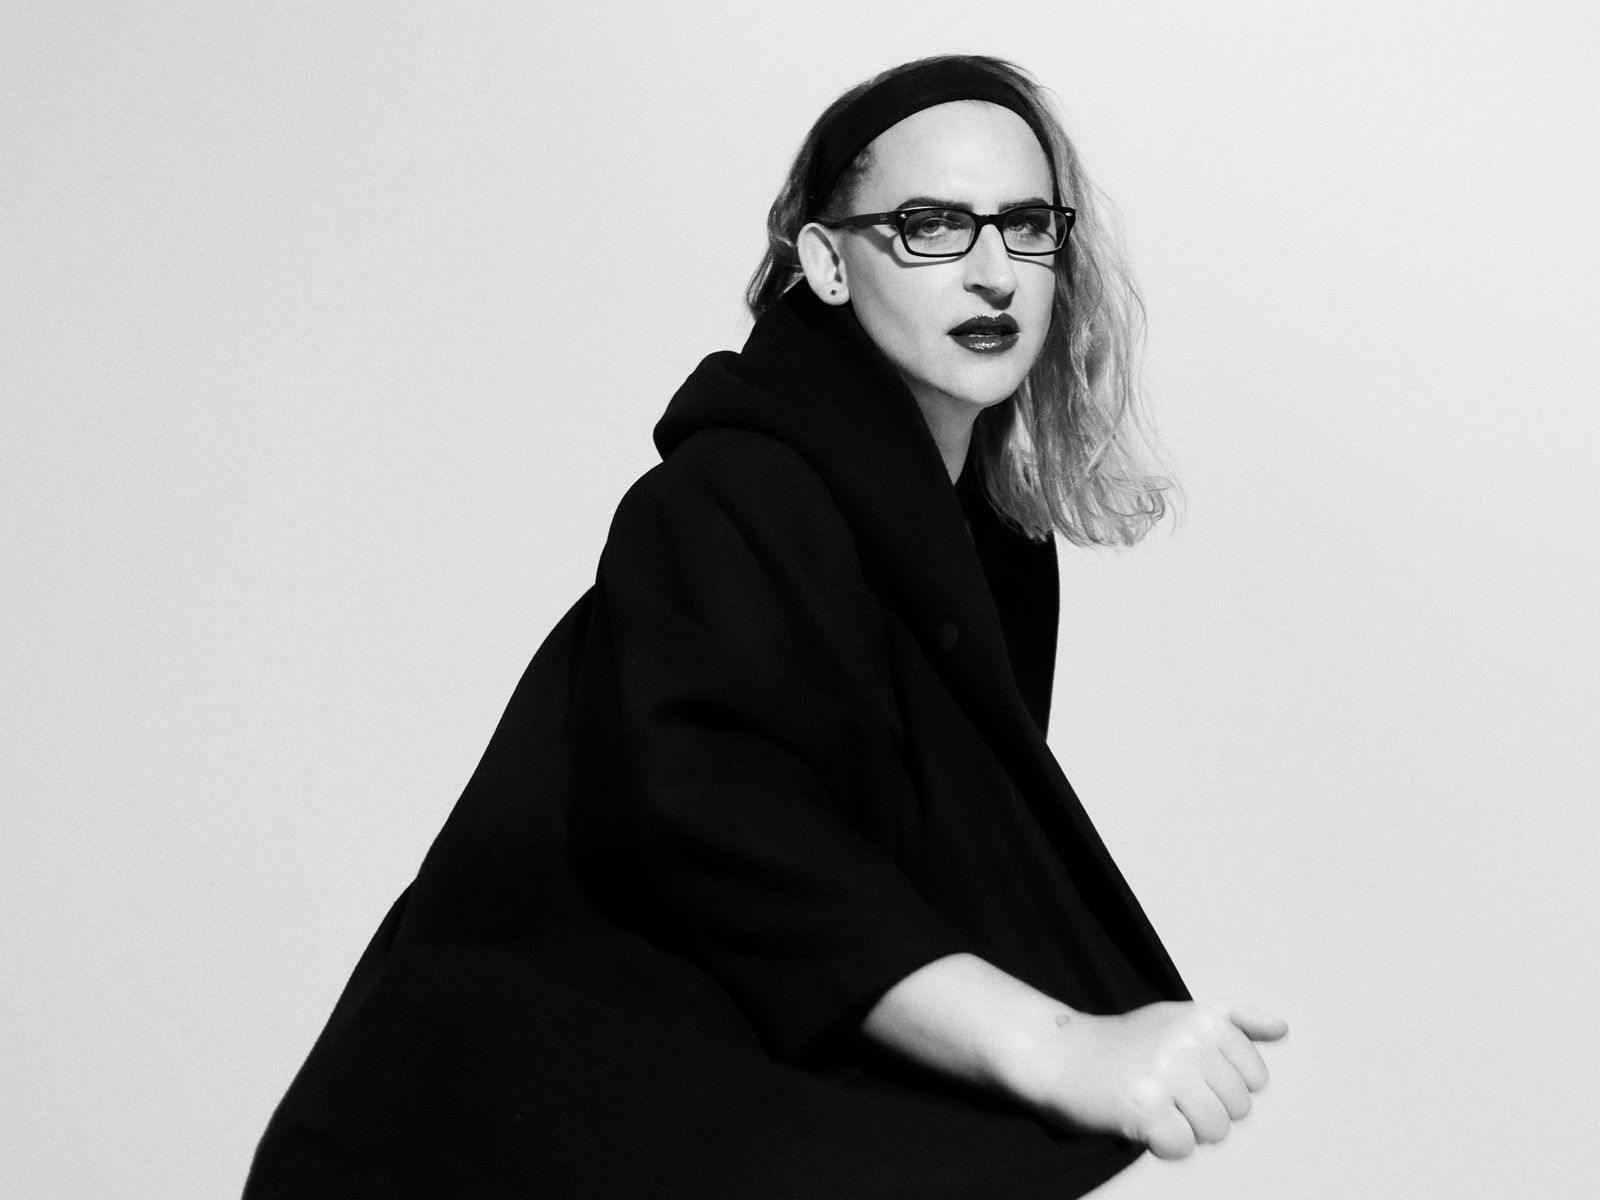 Simona Castricum crouches down, wearing a long black shawl, glasses and lipstick.